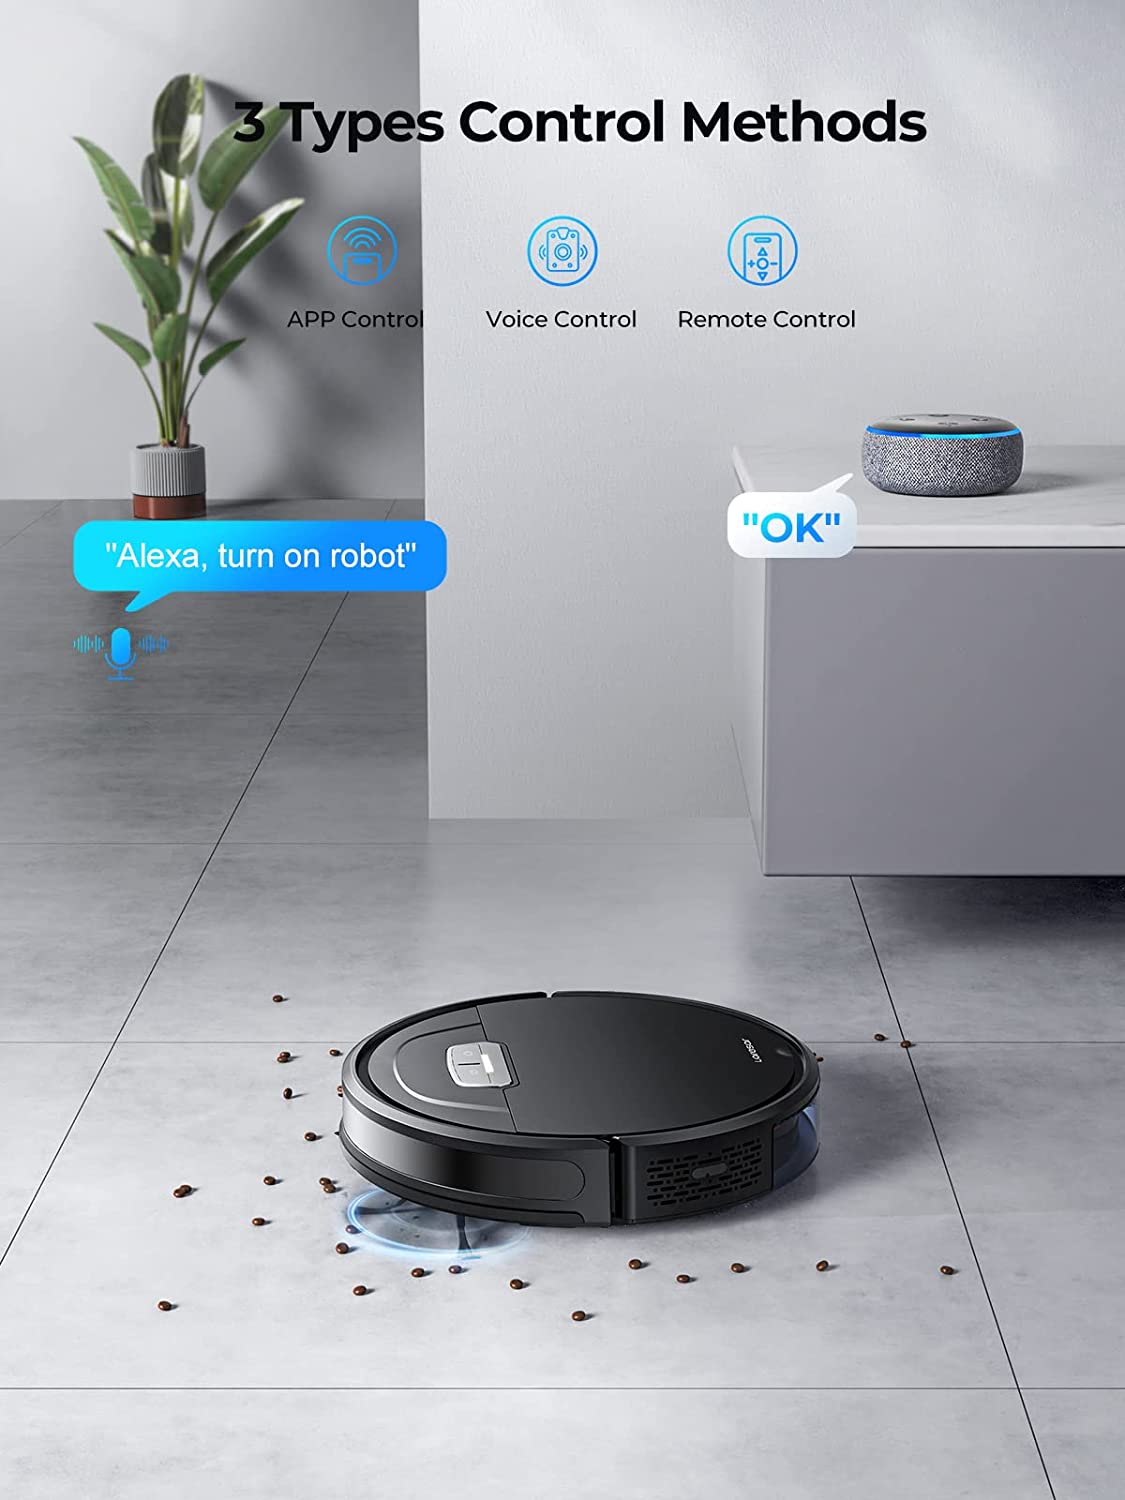 Buy Lubluelu Robot Vacuum Cleaner with Mop 3500Pa, 3 In 1 Robotic